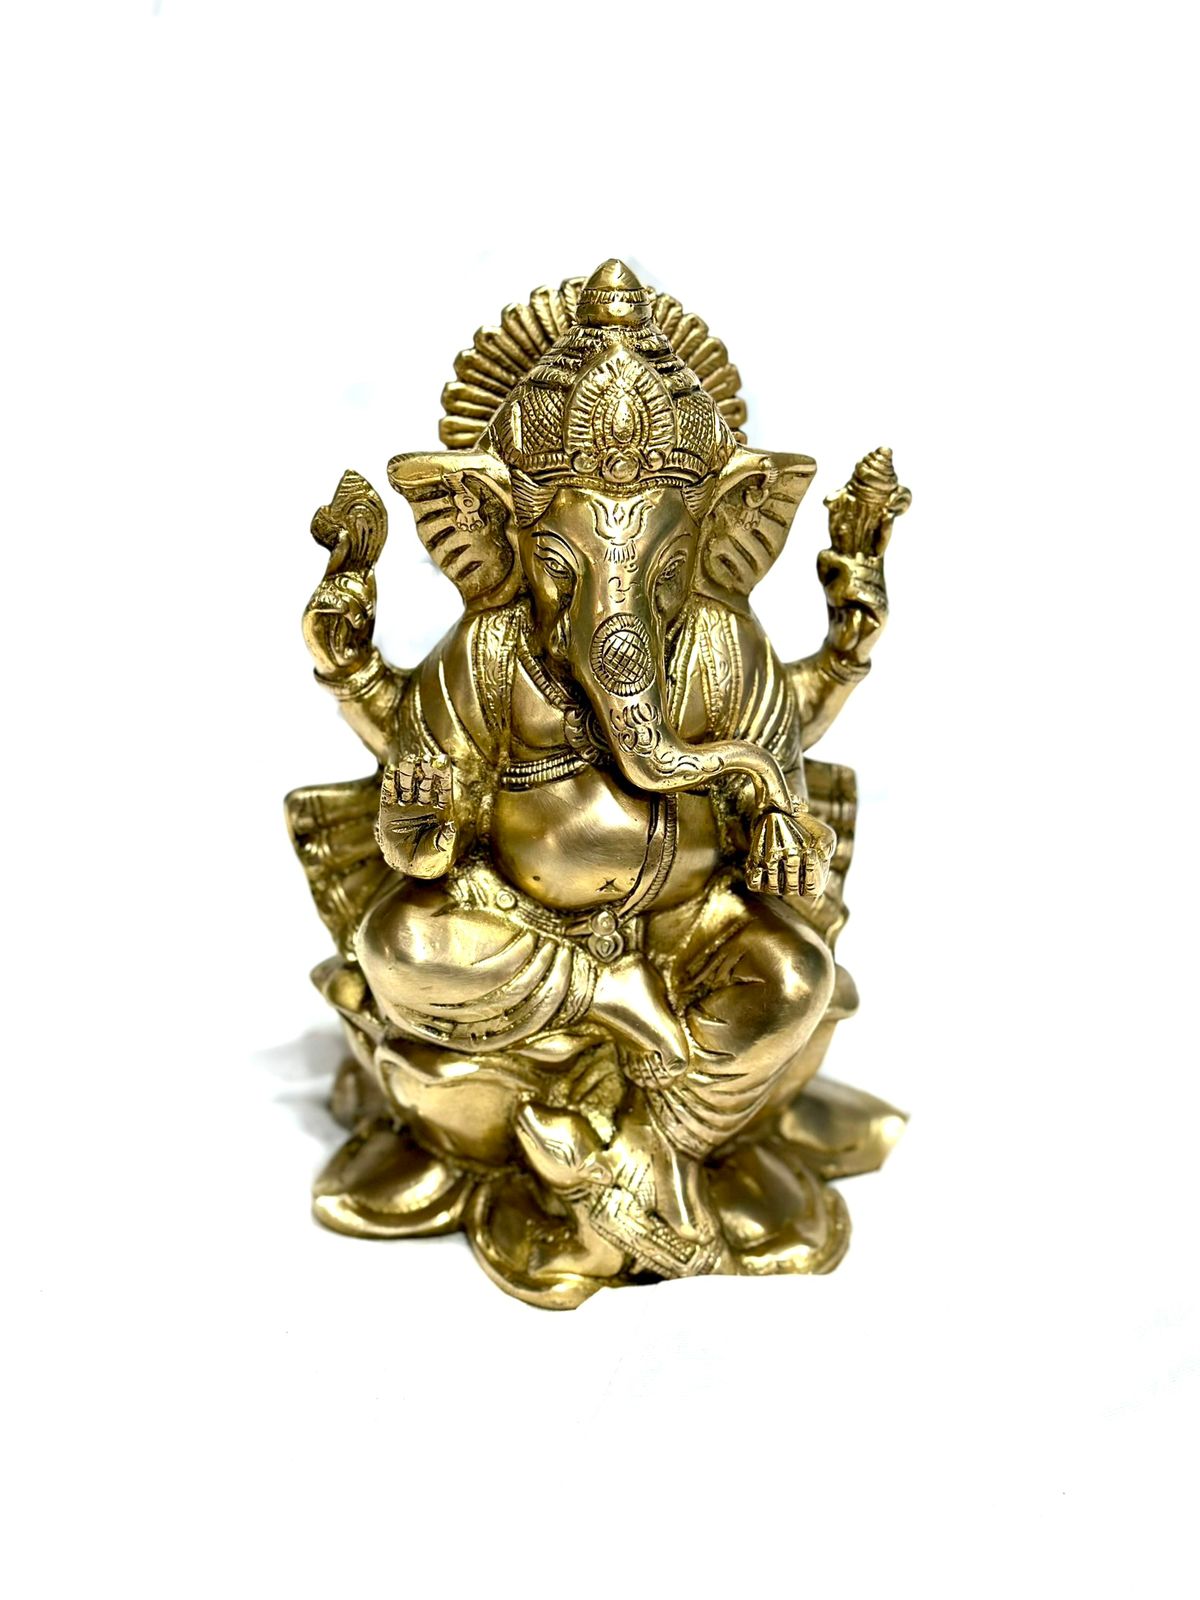 Beautiful Brass Idol Of Graceful Ganesha Home Office Décor By Tamrapatra